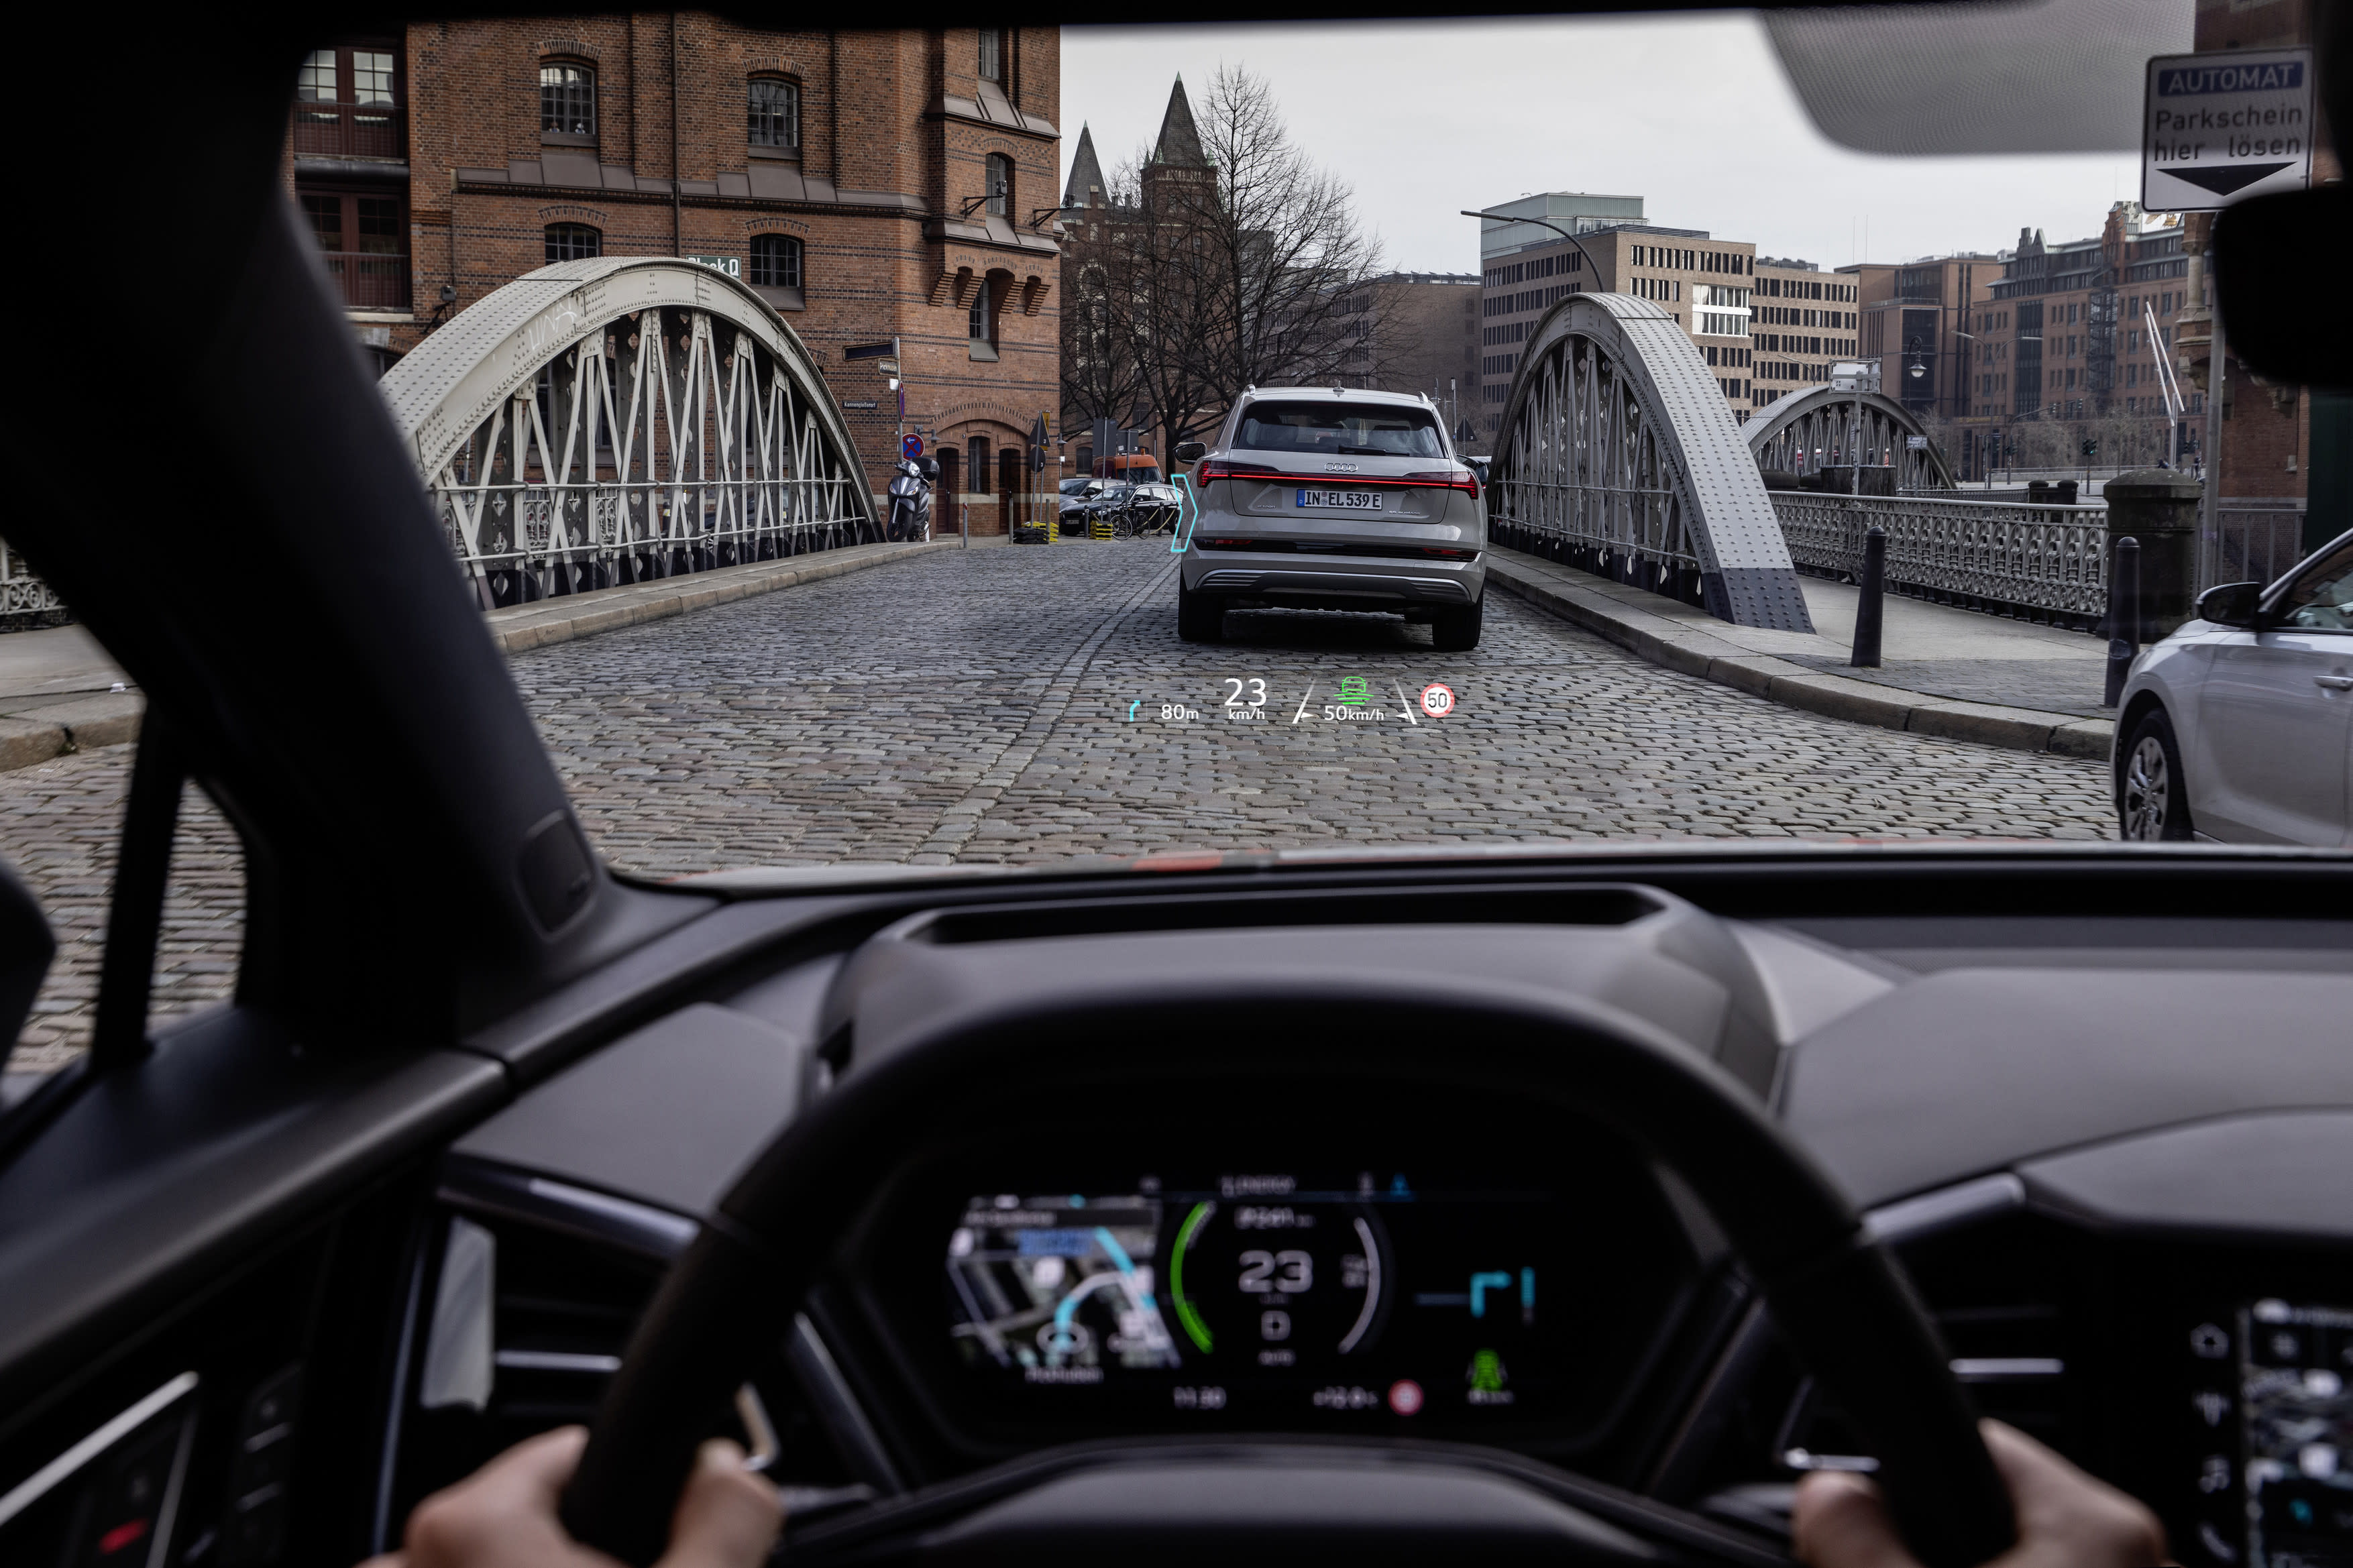 The Audi Q4 e-tron’s extended HUD directs information to the windshield